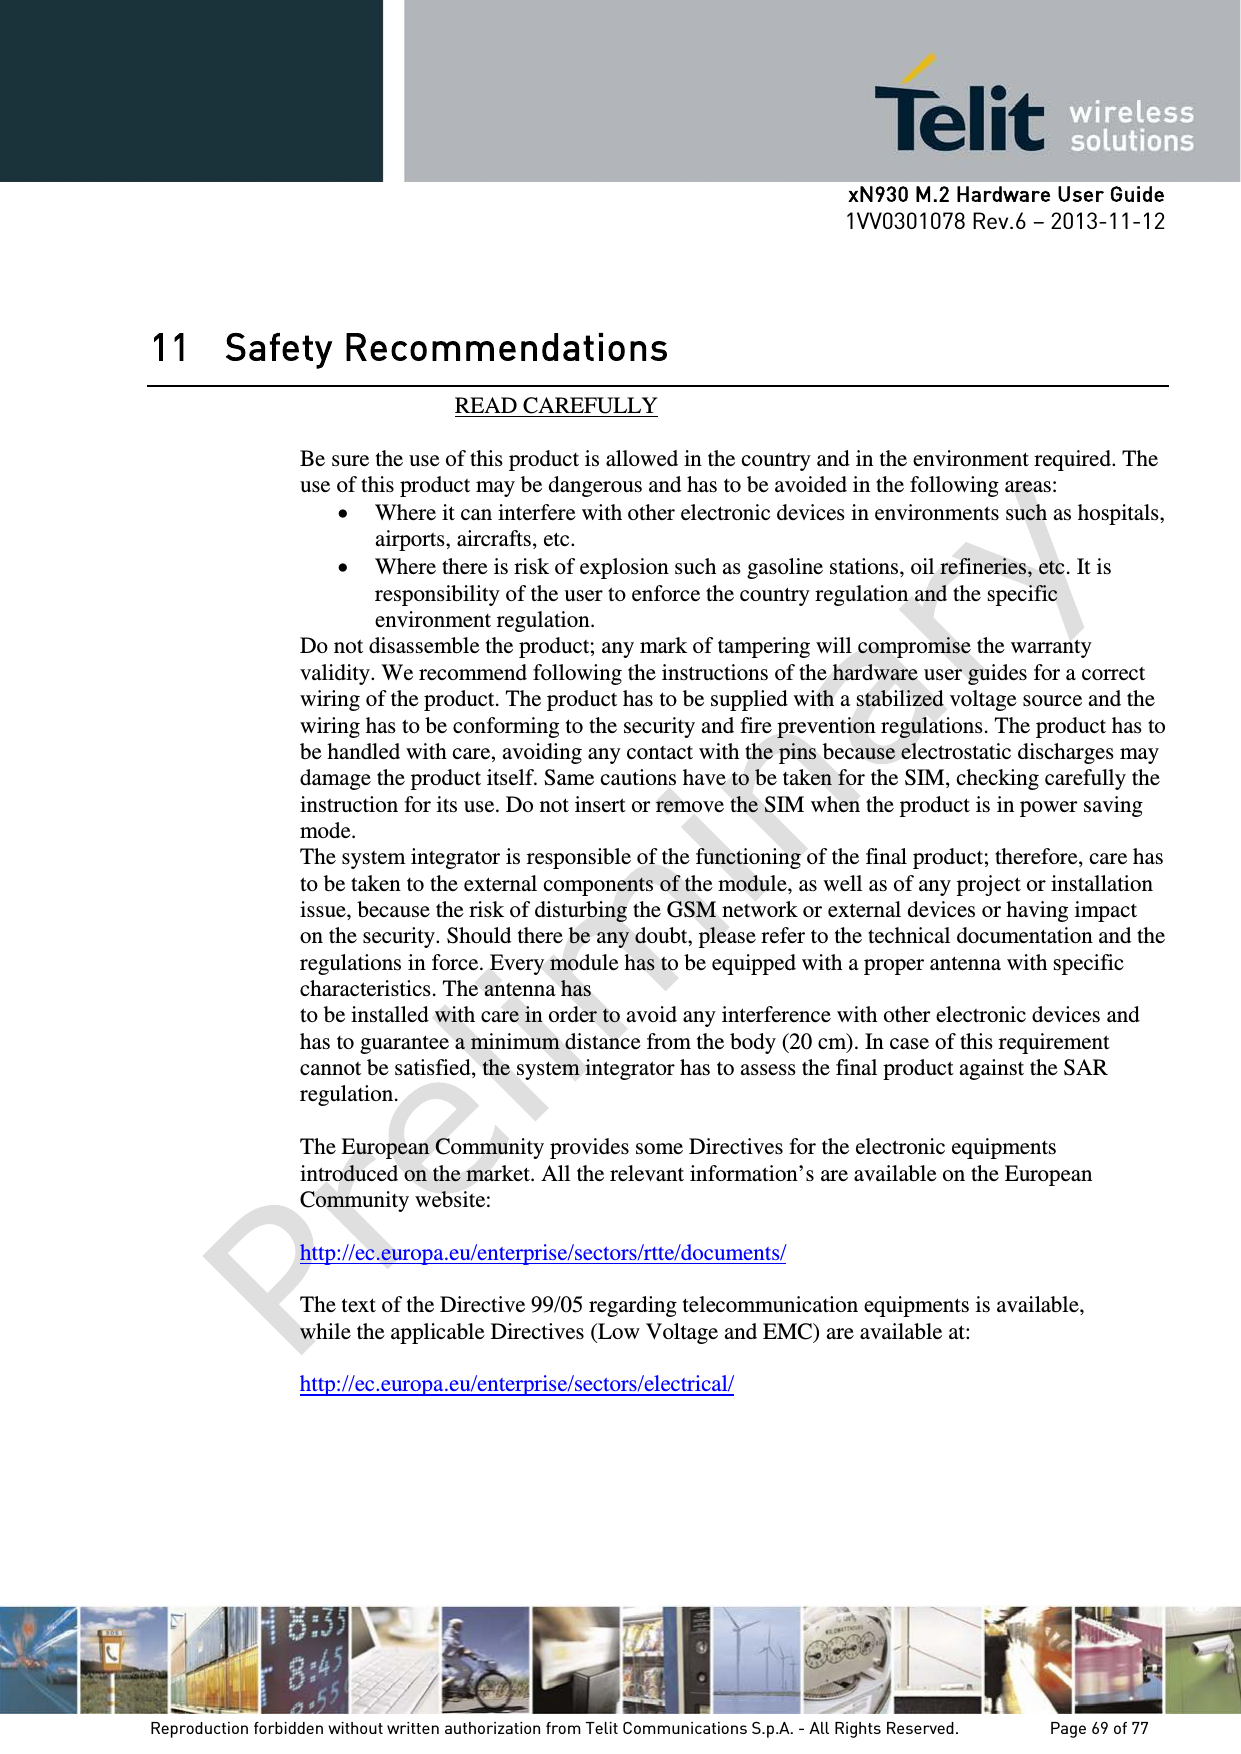      xN930 M.2 Hardware User Guide 1VV0301078 Rev.6 – 2013-11-12    11 Safety Recommendations                            READ CAREFULLY  Be sure the use of this product is allowed in the country and in the environment required. The use of this product may be dangerous and has to be avoided in the following areas: • Where it can interfere with other electronic devices in environments such as hospitals, airports, aircrafts, etc. • Where there is risk of explosion such as gasoline stations, oil refineries, etc. It is responsibility of the user to enforce the country regulation and the specific environment regulation. Do not disassemble the product; any mark of tampering will compromise the warranty validity. We recommend following the instructions of the hardware user guides for a correct wiring of the product. The product has to be supplied with a stabilized voltage source and the wiring has to be conforming to the security and fire prevention regulations. The product has to be handled with care, avoiding any contact with the pins because electrostatic discharges may damage the product itself. Same cautions have to be taken for the SIM, checking carefully the instruction for its use. Do not insert or remove the SIM when the product is in power saving mode. The system integrator is responsible of the functioning of the final product; therefore, care has to be taken to the external components of the module, as well as of any project or installation issue, because the risk of disturbing the GSM network or external devices or having impact on the security. Should there be any doubt, please refer to the technical documentation and the regulations in force. Every module has to be equipped with a proper antenna with specific characteristics. The antenna has to be installed with care in order to avoid any interference with other electronic devices and has to guarantee a minimum distance from the body (20 cm). In case of this requirement cannot be satisfied, the system integrator has to assess the final product against the SAR regulation.  The European Community provides some Directives for the electronic equipments introduced on the market. All the relevant information’s are available on the European Community website:  http://ec.europa.eu/enterprise/sectors/rtte/documents/  The text of the Directive 99/05 regarding telecommunication equipments is available, while the applicable Directives (Low Voltage and EMC) are available at:  http://ec.europa.eu/enterprise/sectors/electrical/              Reproduction forbidden without written authorization from Telit Communications S.p.A. - All Rights Reserved.    Page 69 of 77 